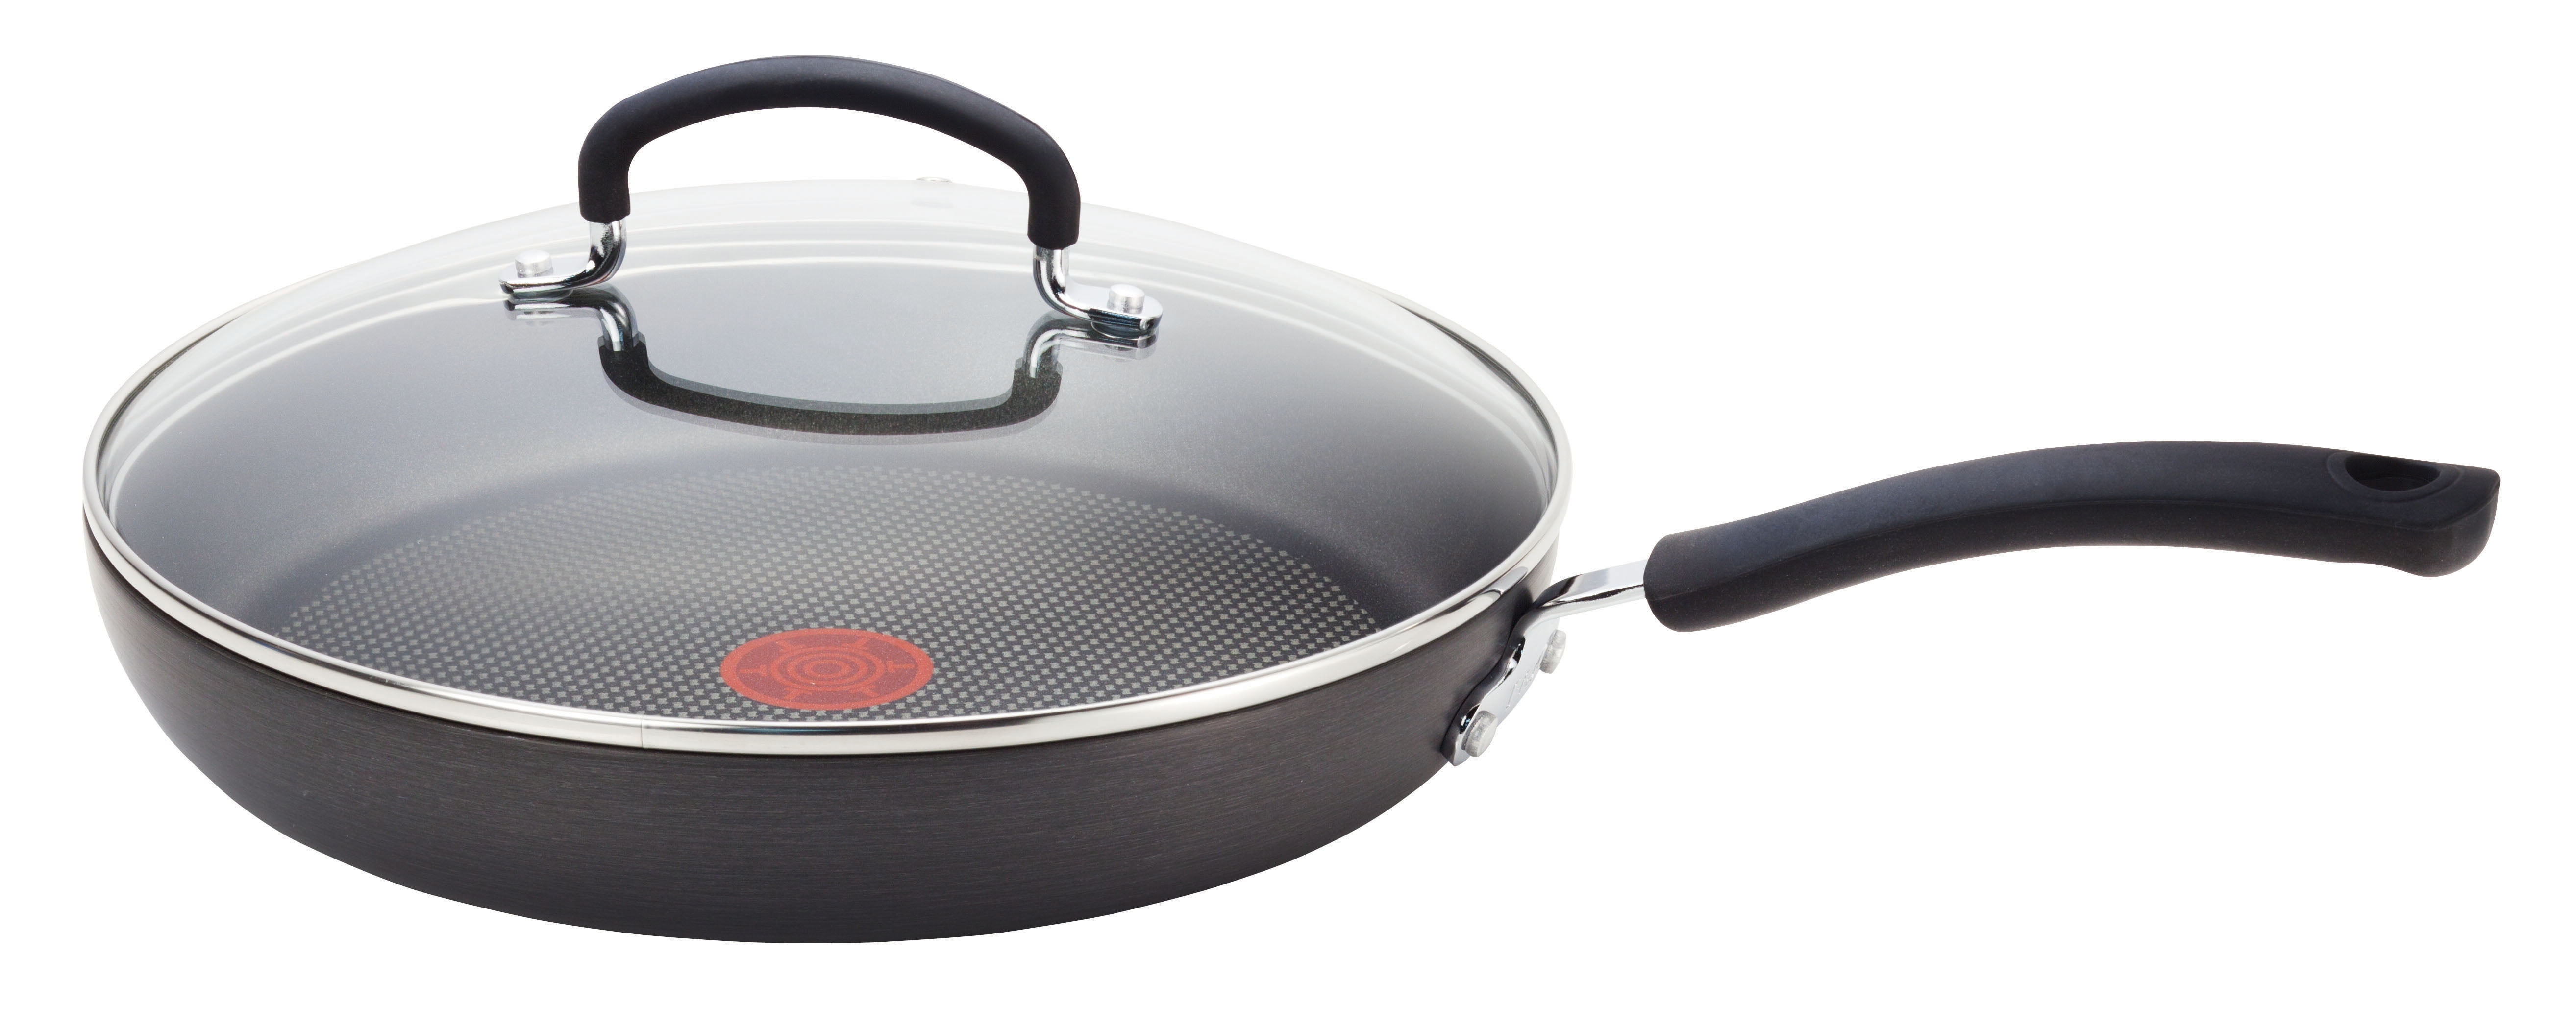 T-fal Ultimate Hard Anodized Nonstick Griddle 10.25 Inch Cookware